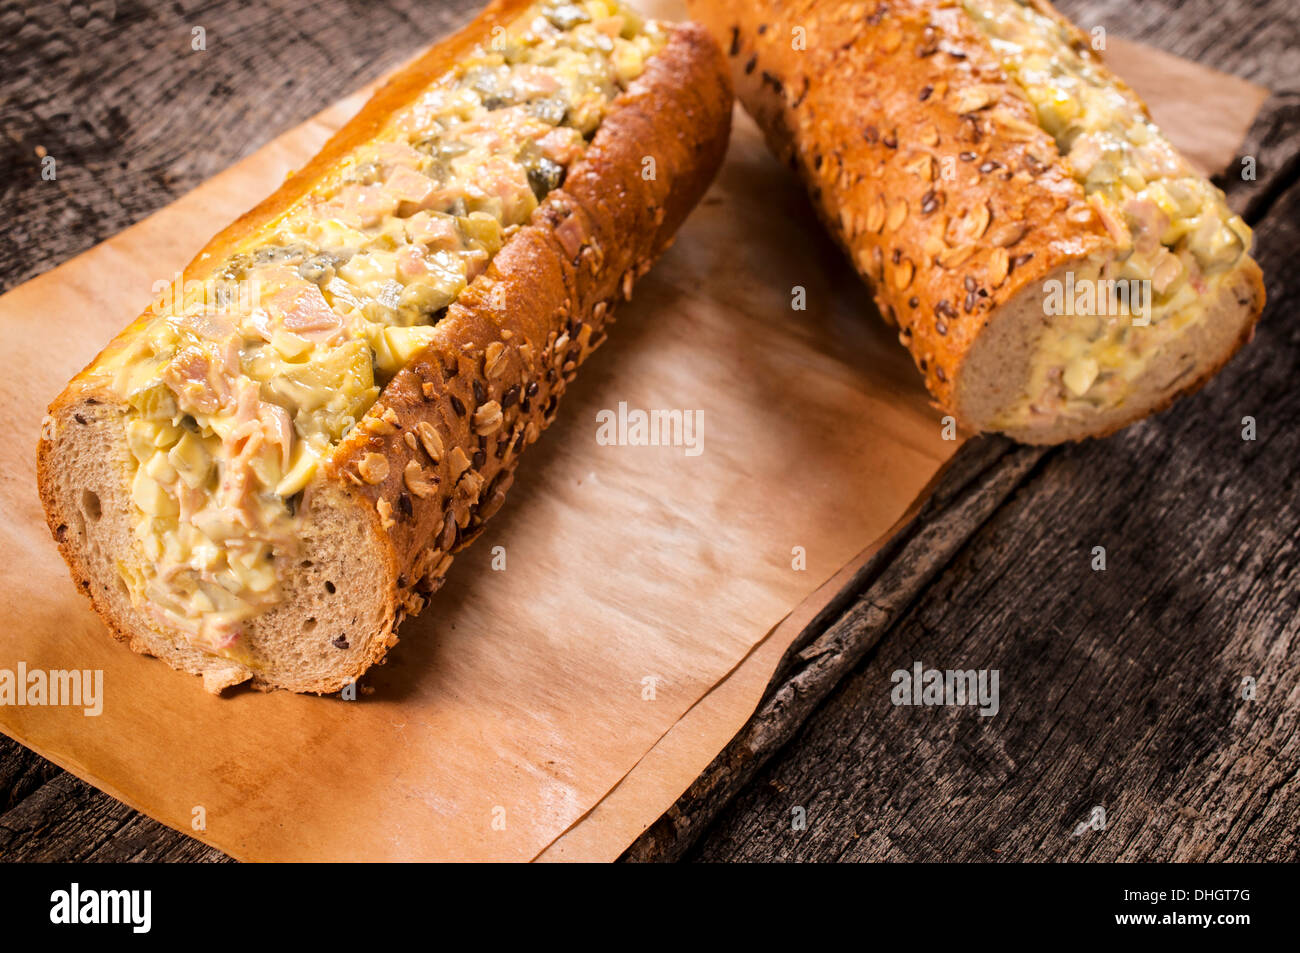 Two big sandwiches with Russian salad.Selective focus on the left sandwich  Stock Photo